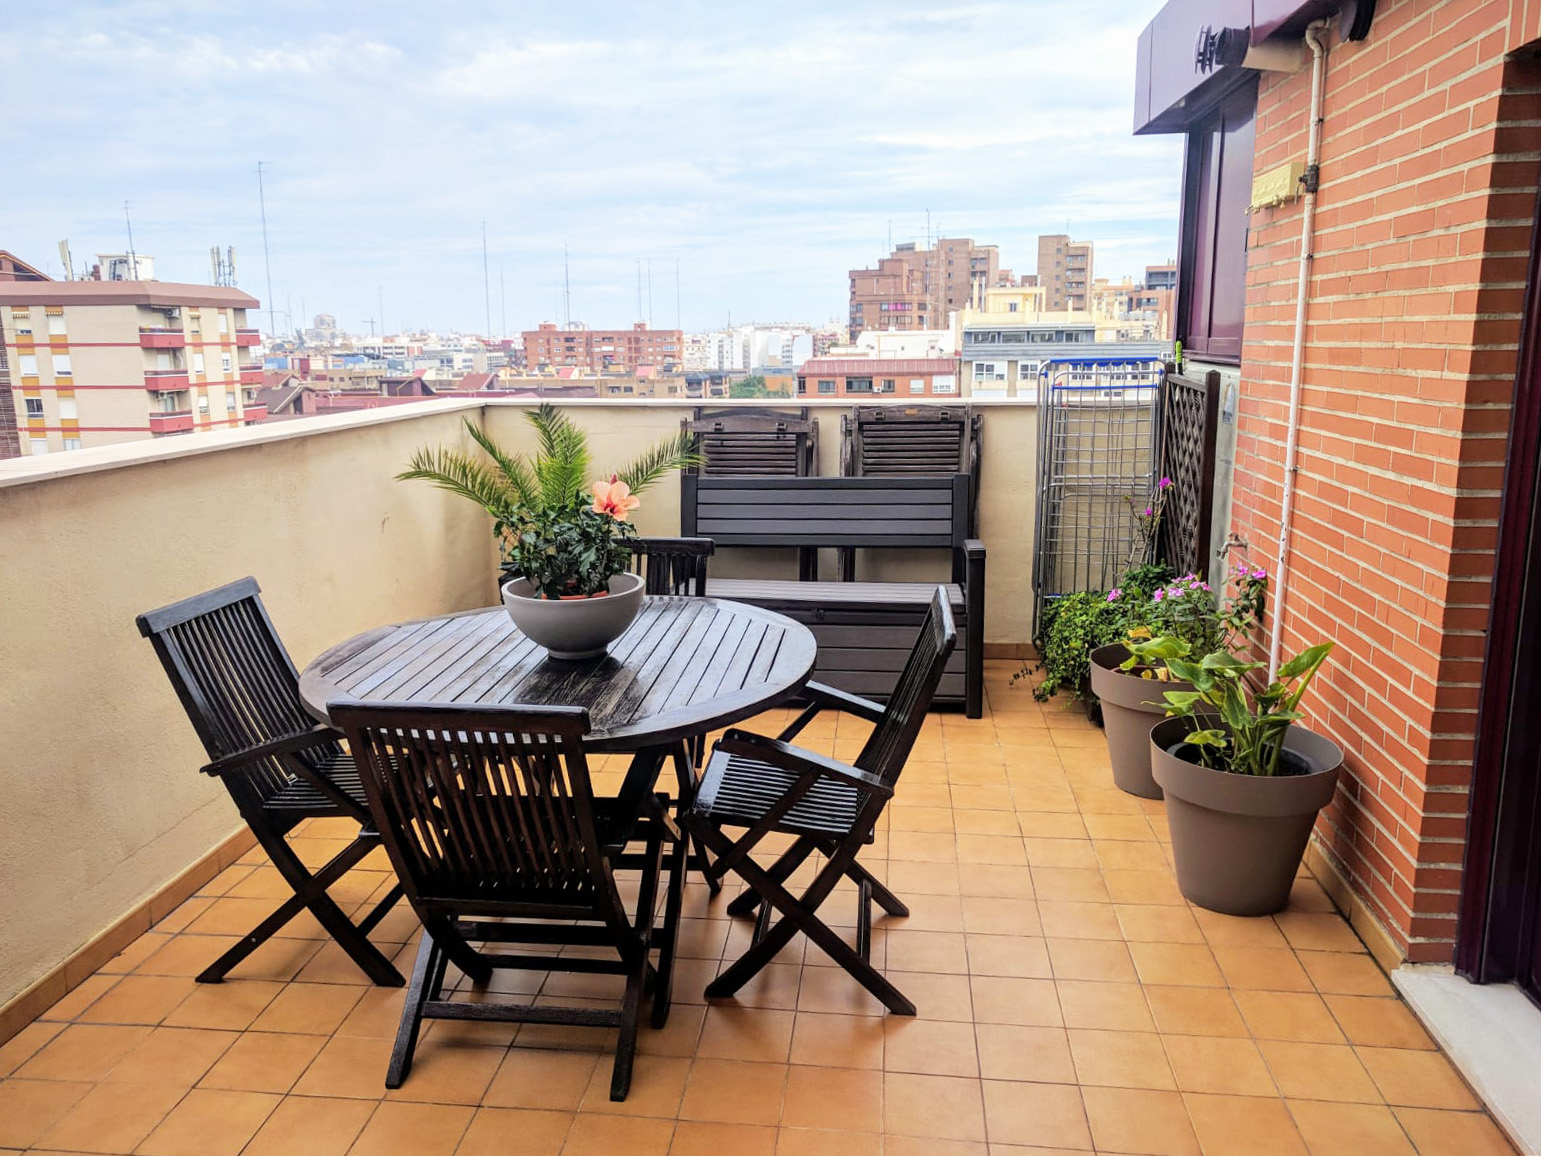 Balcony in student apartment in Valencia, Spain.